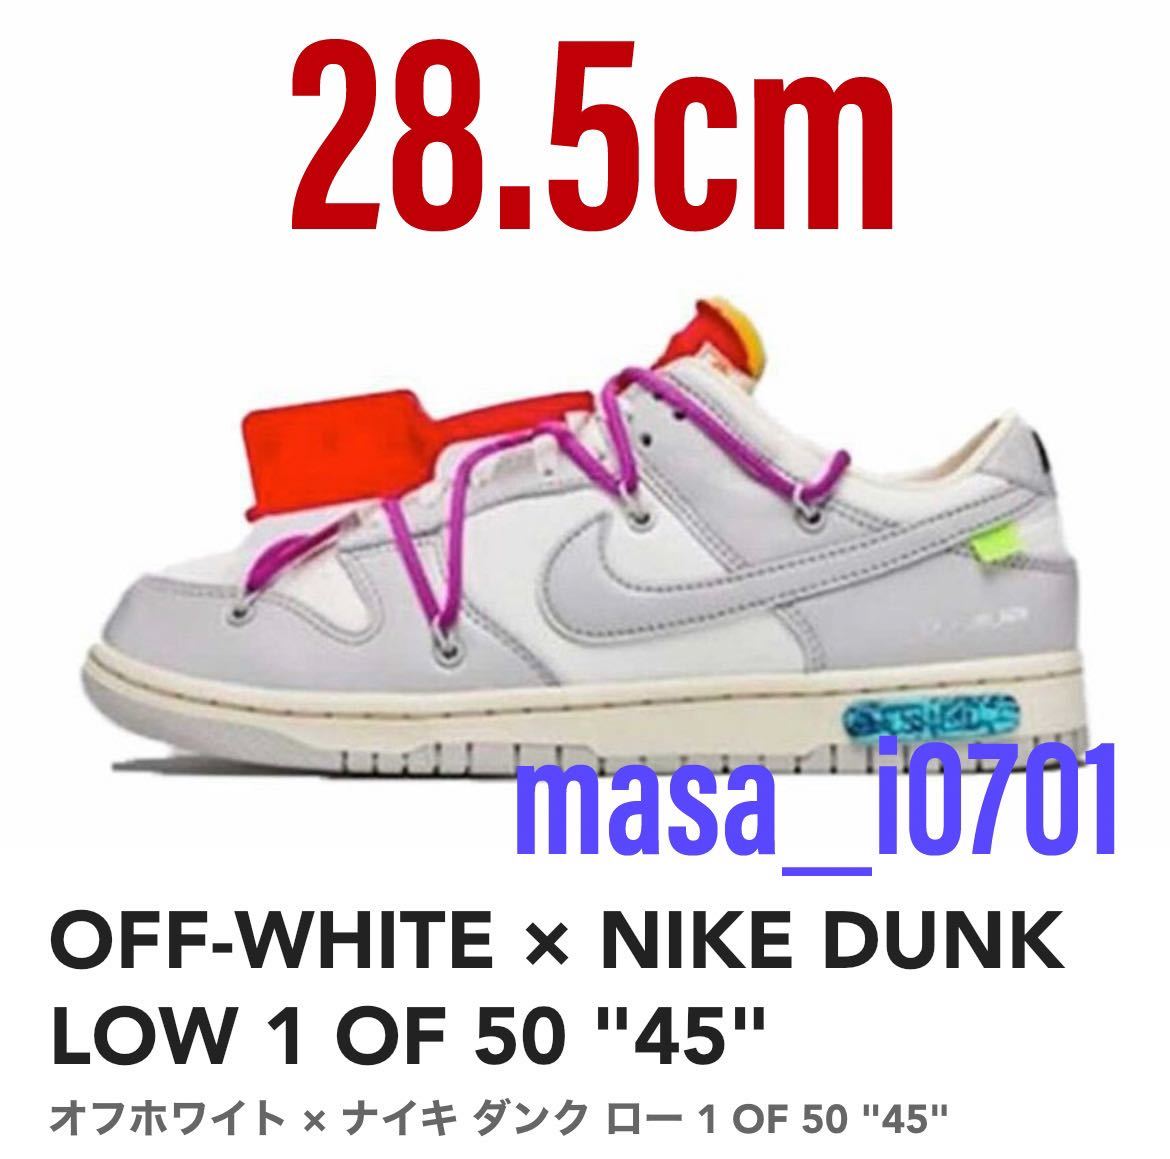 Off-white × NIKE DUNK LOW 1 OF 50 “45” 新品 オマケ付